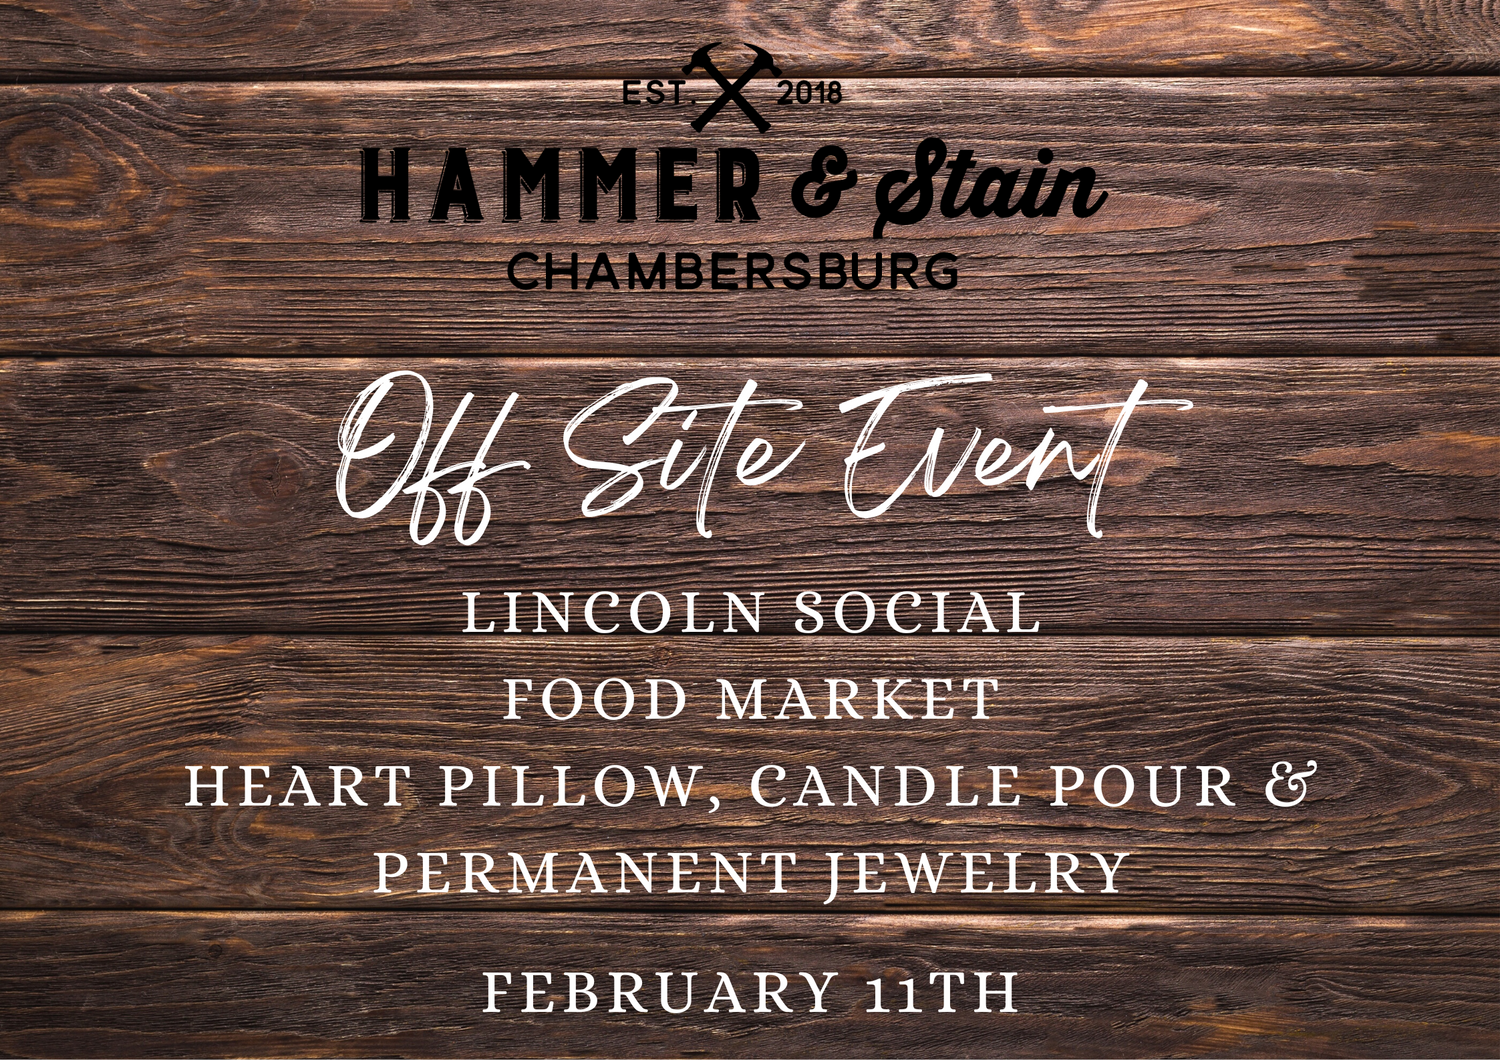 02/11/24 Lincoln Social Food Market VALENTINES EVENT Heart Pillow, Candle Pour & Permanent Jewelry Event 1p-3p